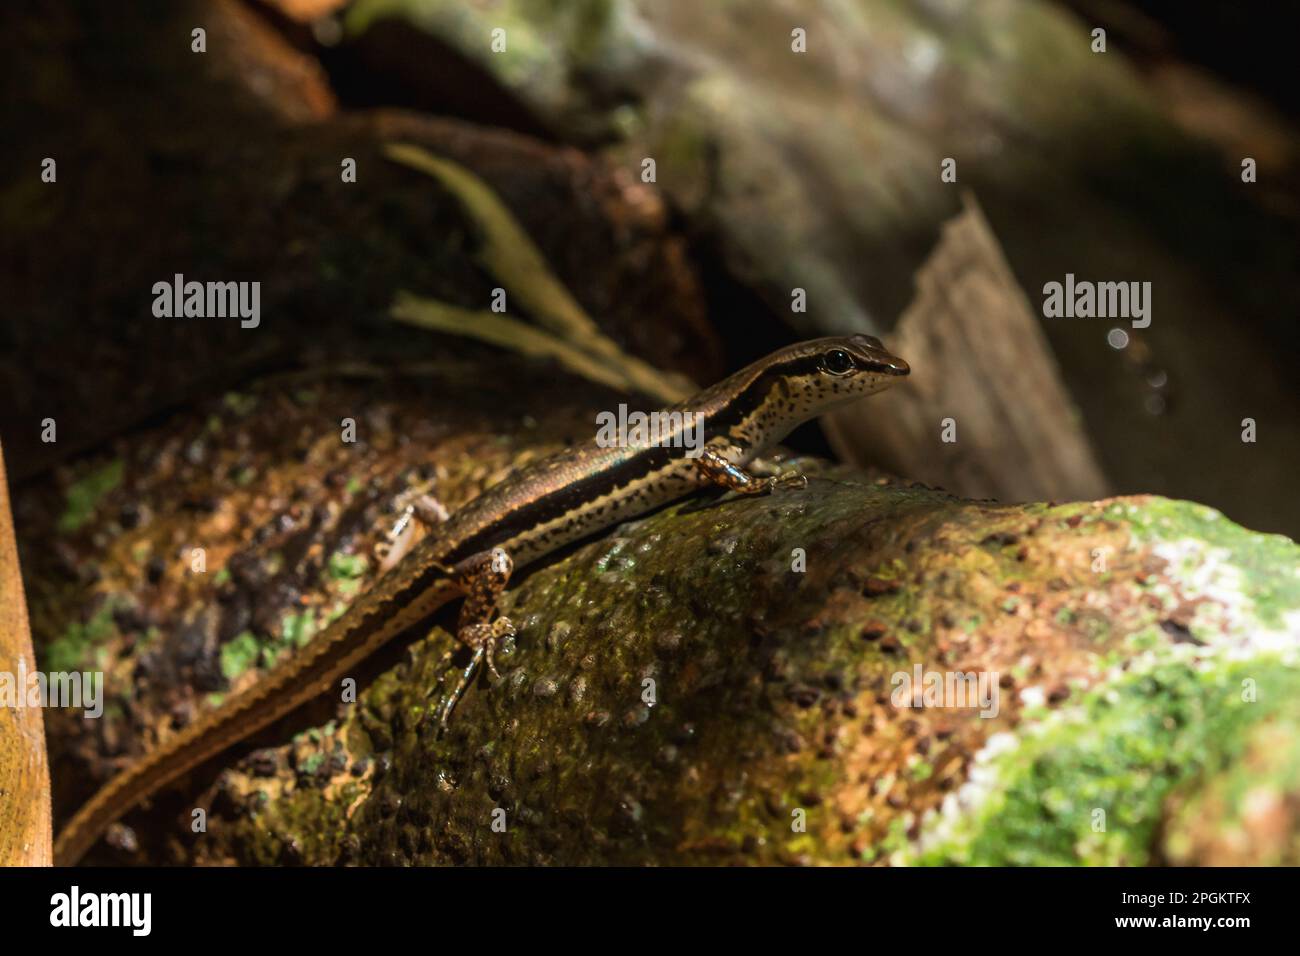 A skink on a log in nature , Skink is a reptile that is rated. Squamata, Spotted forest skink, Maculated forest skink, Sphenomorphus maculatus are on Stock Photo